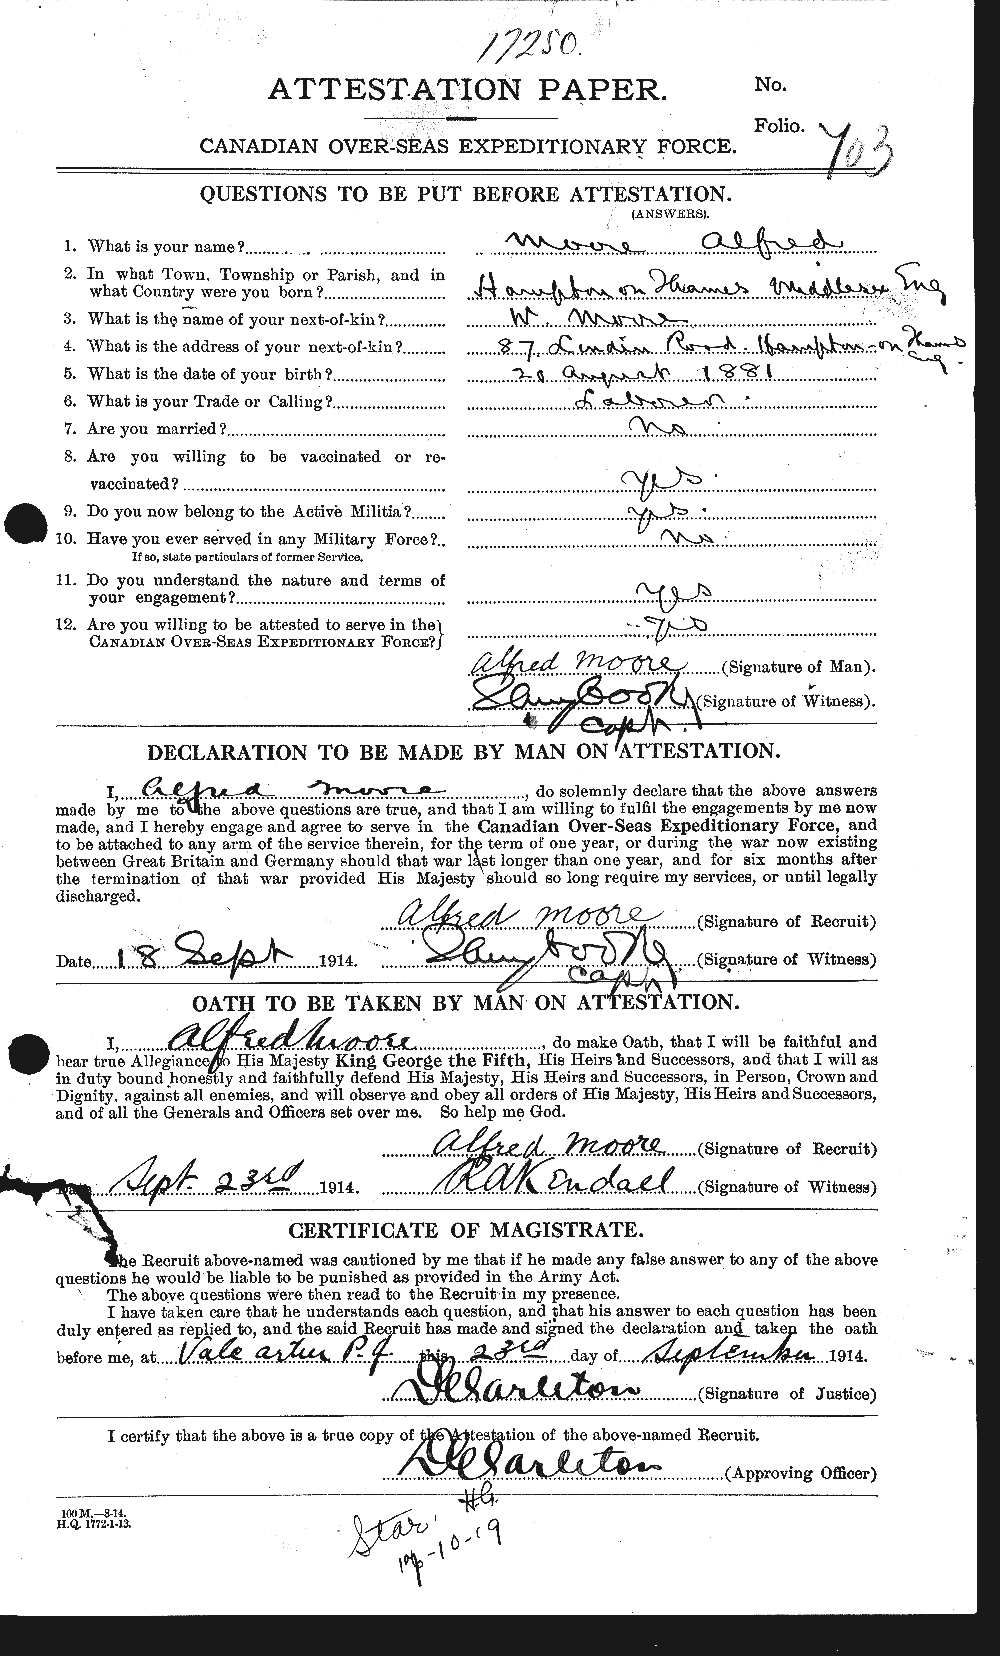 Personnel Records of the First World War - CEF 506383a